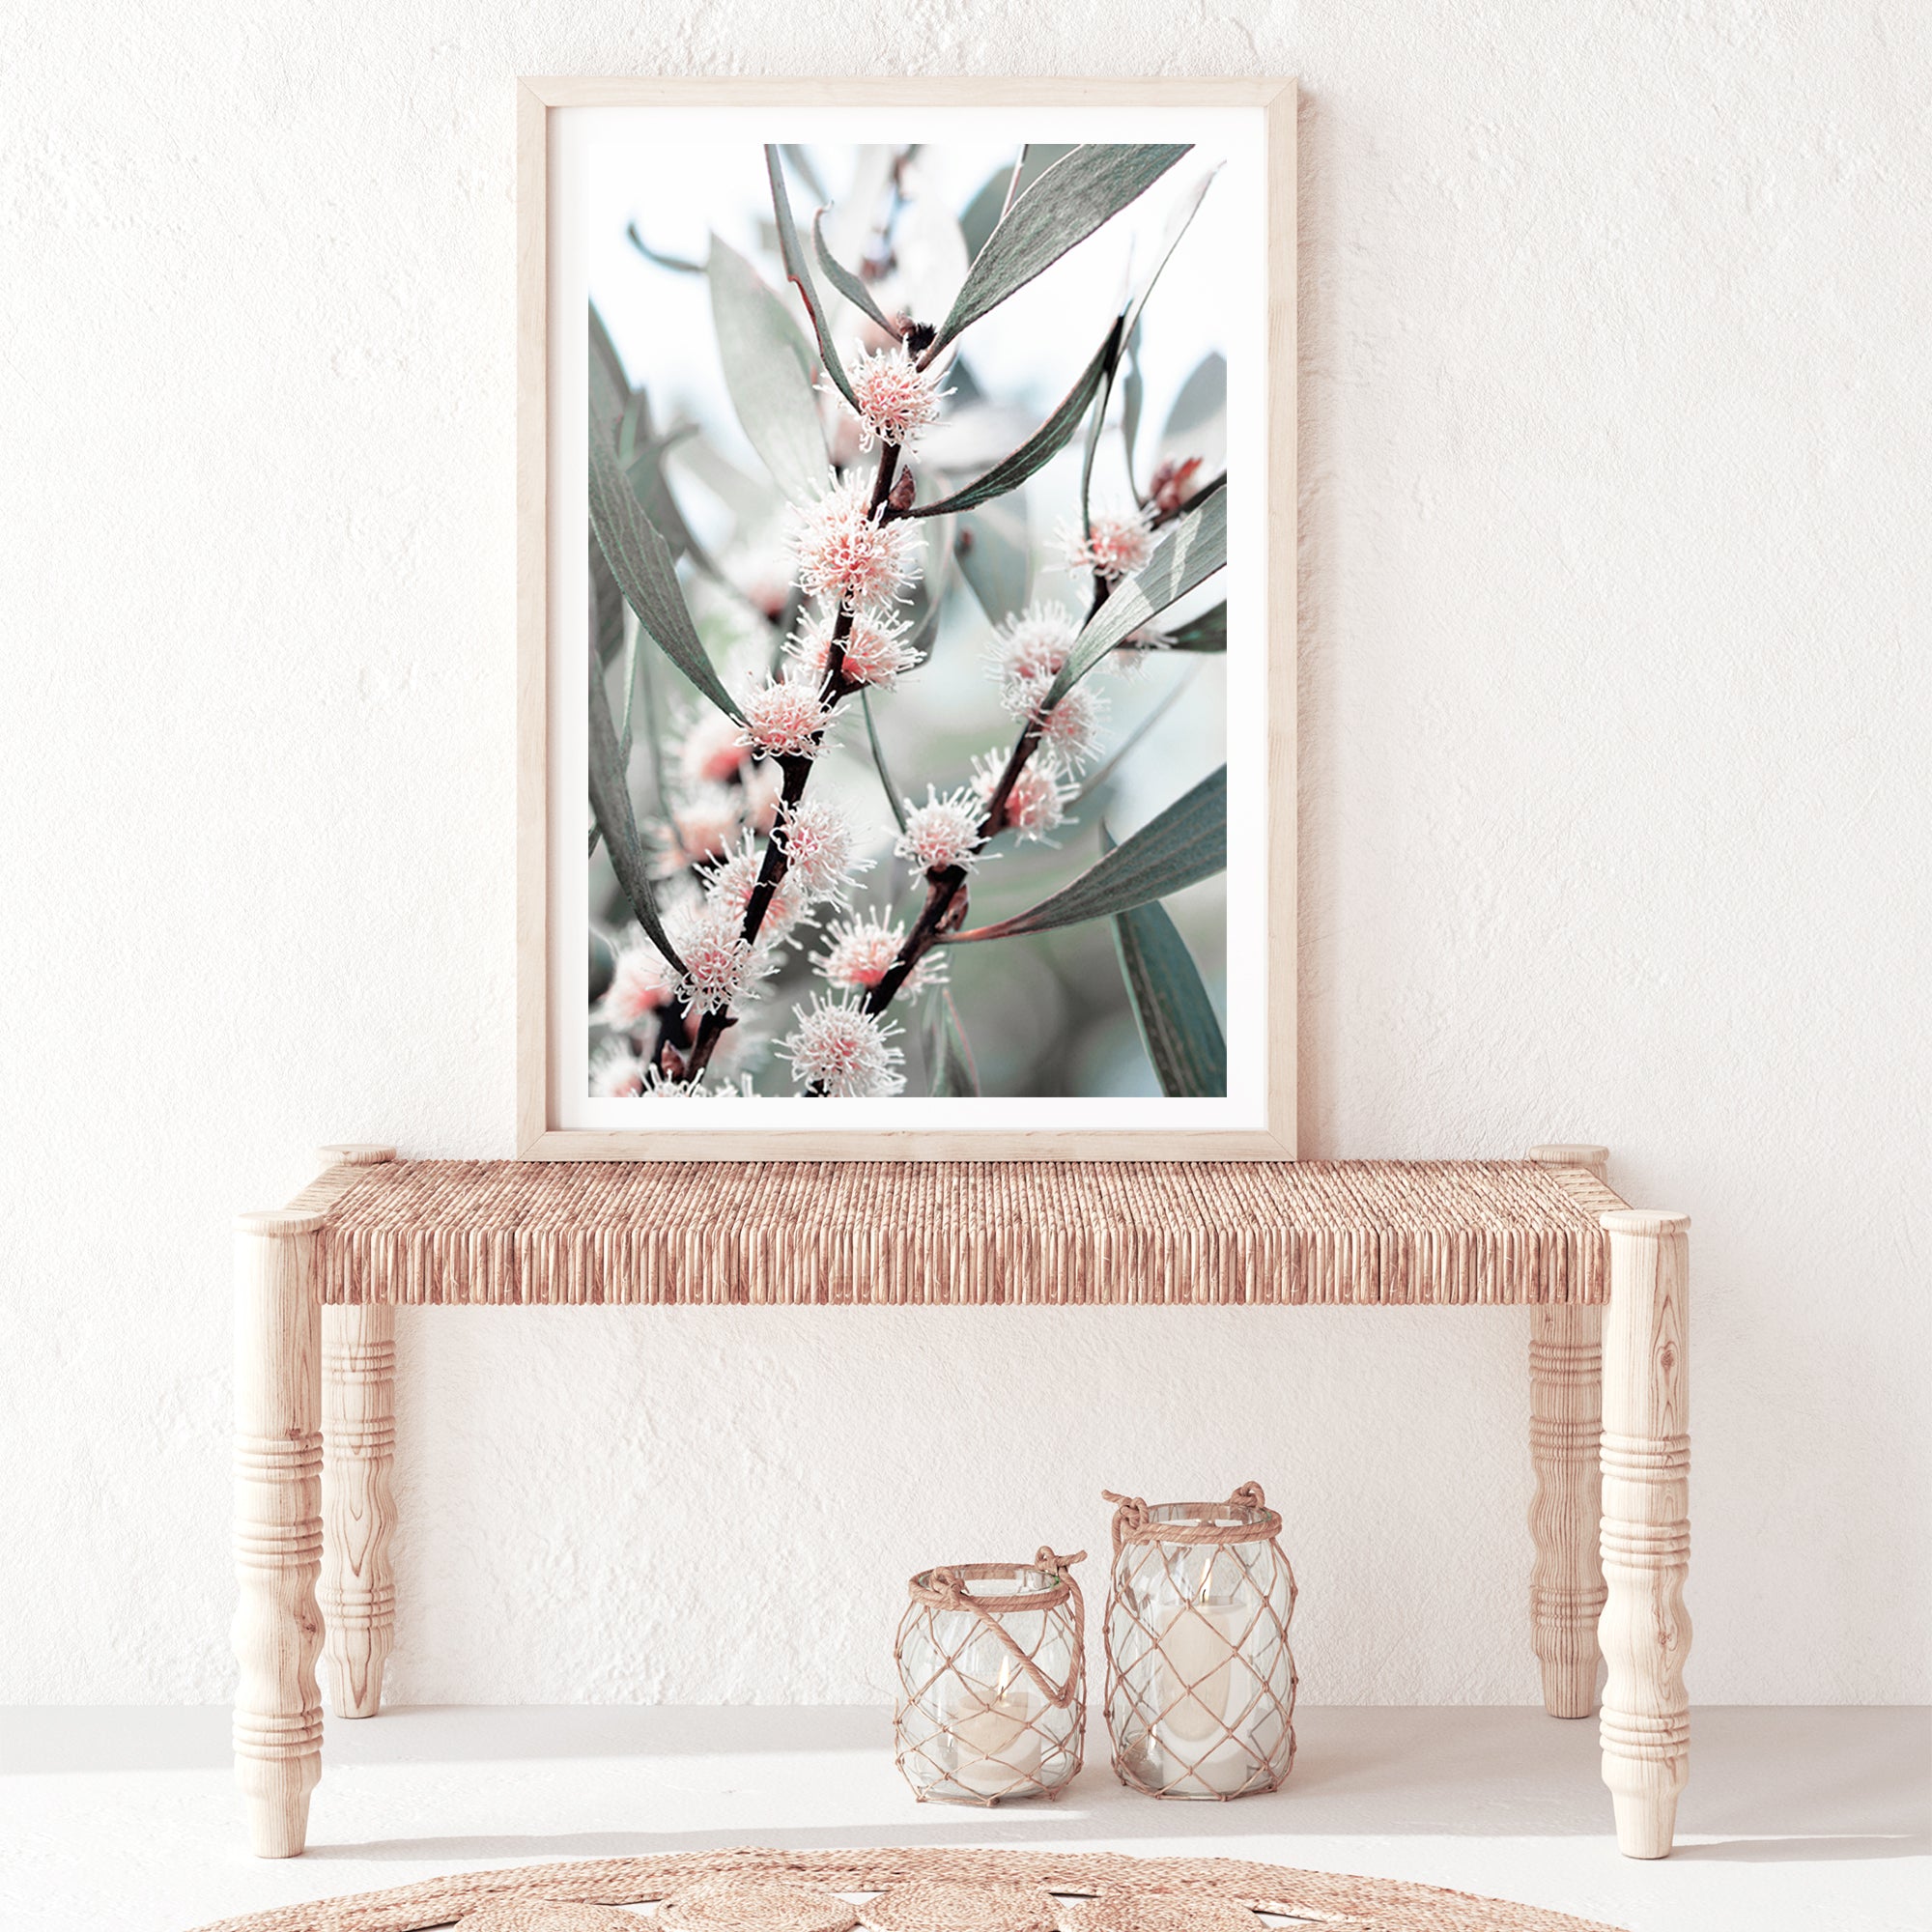 A framed or unframed Australian artwork of eucalytpus pink wild flowers and green leaves with branches in the background.